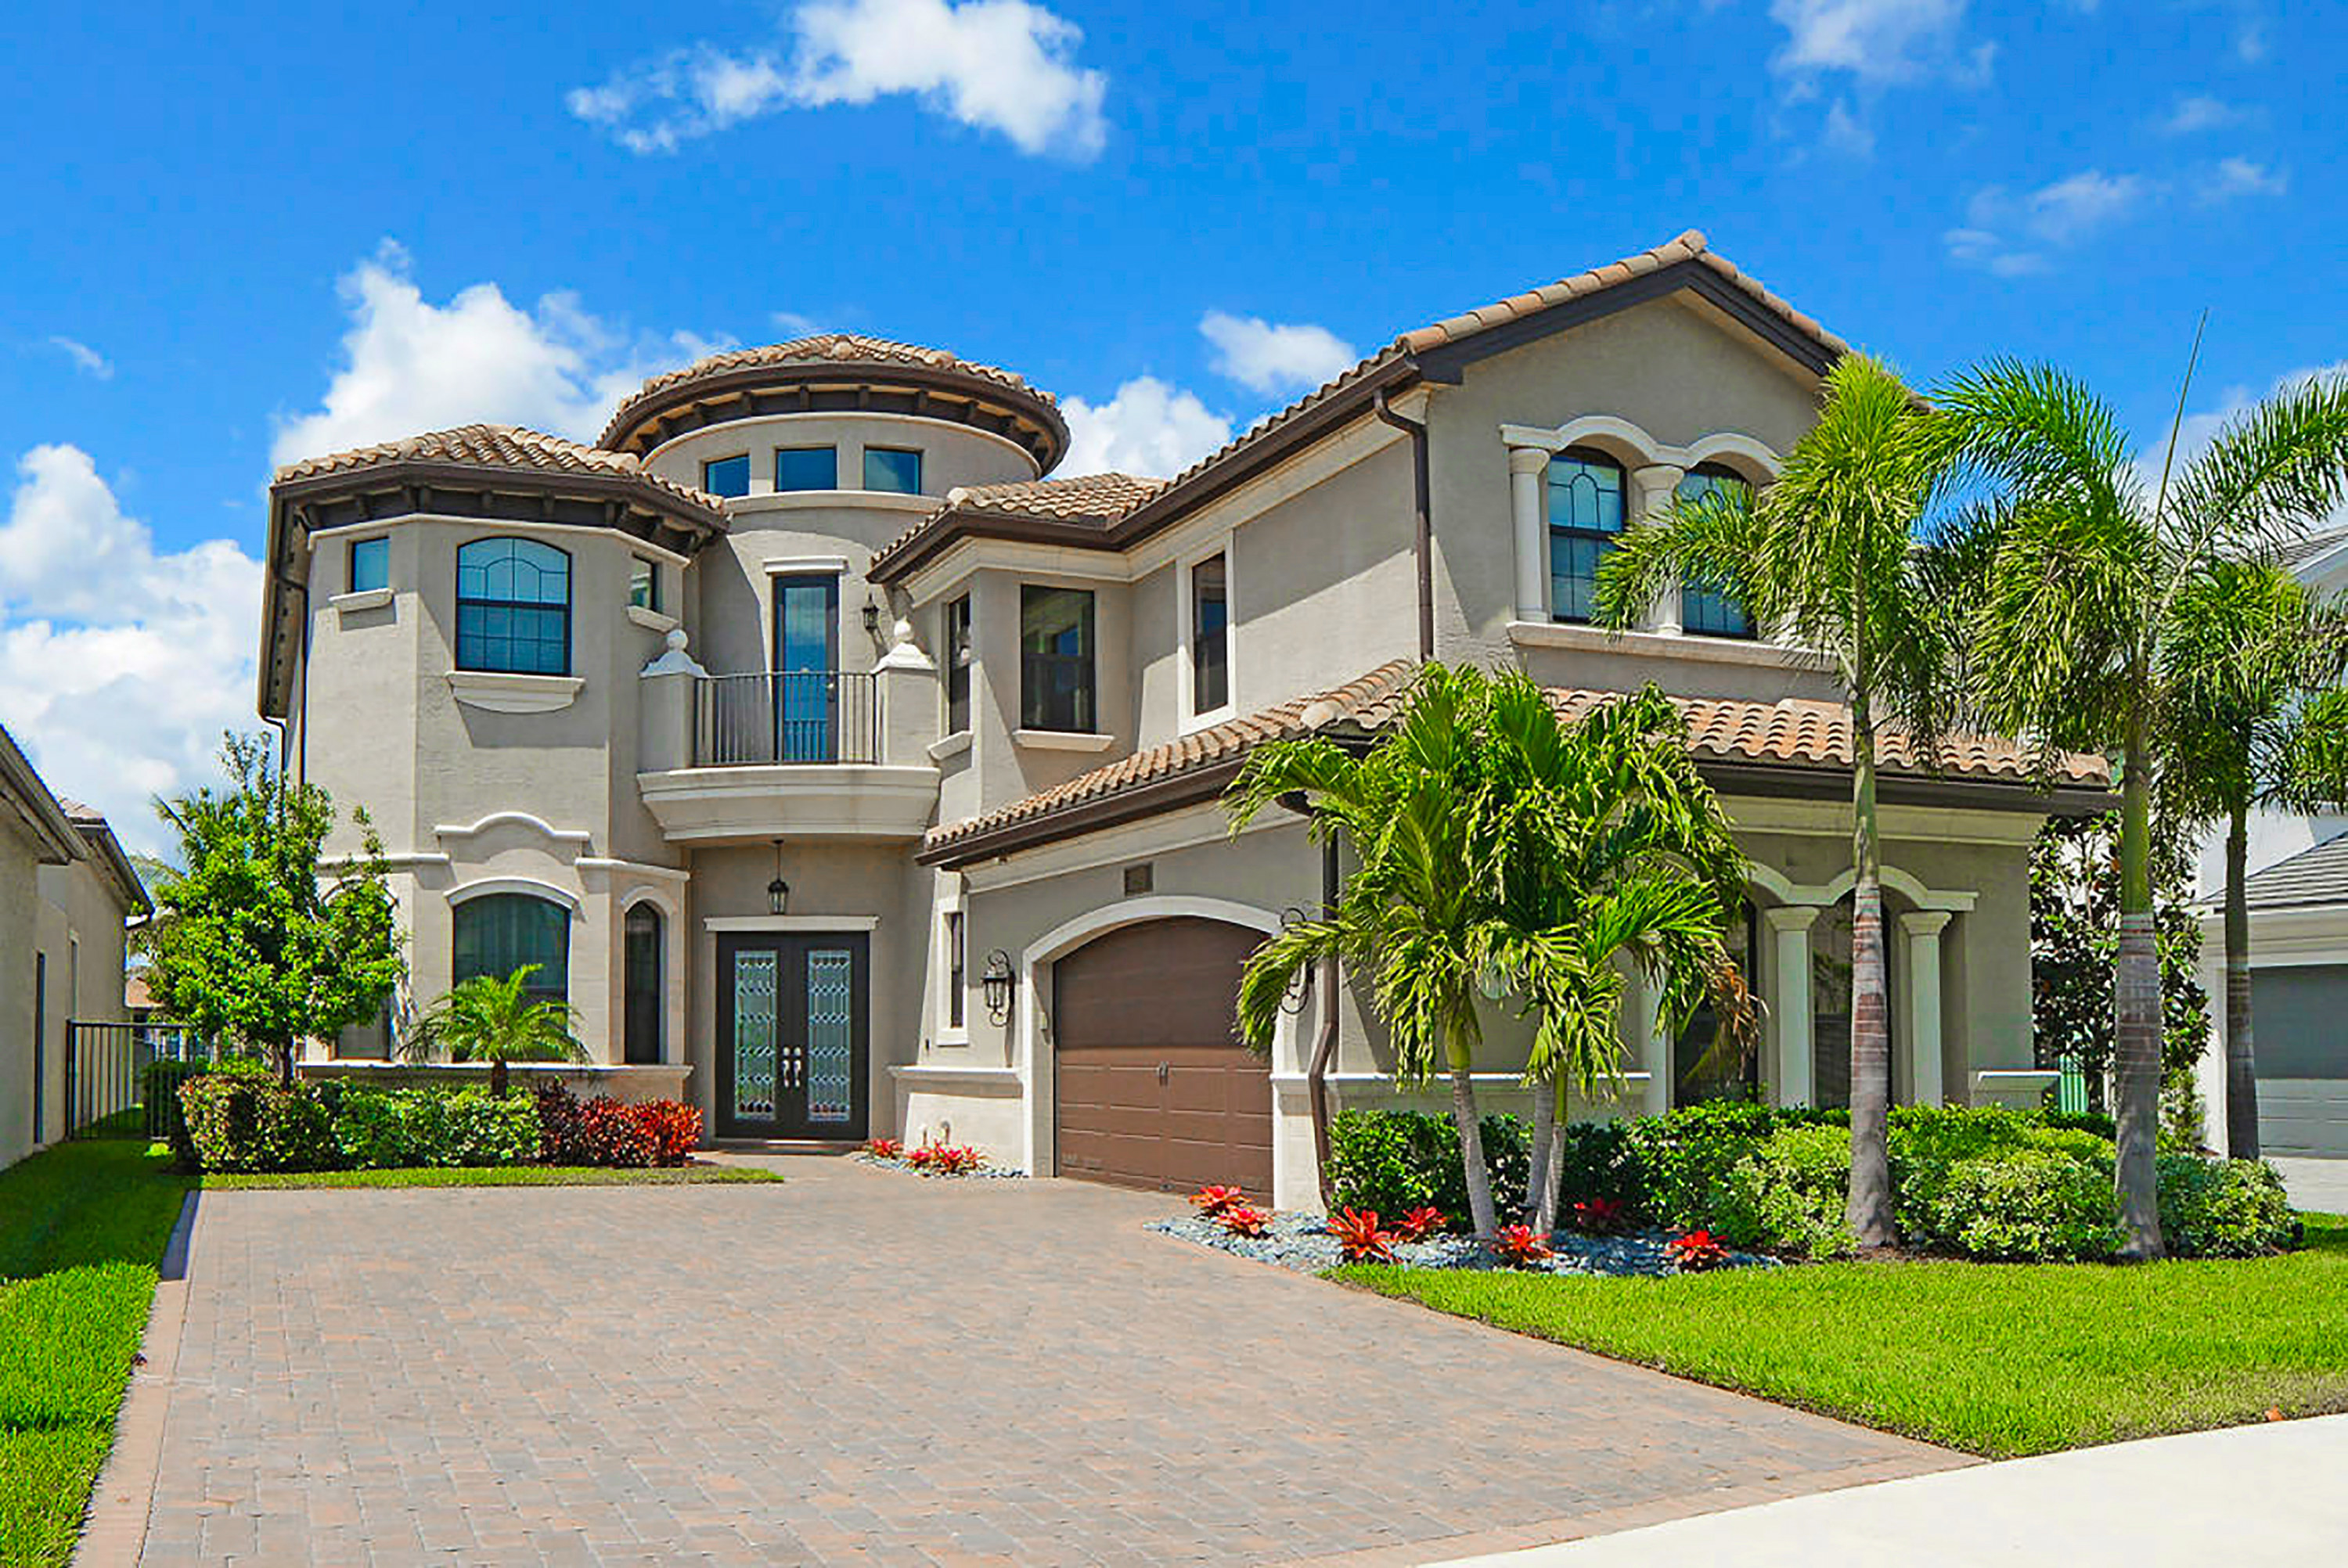 McMansion-style home with large driveway and palm trees in a housing development